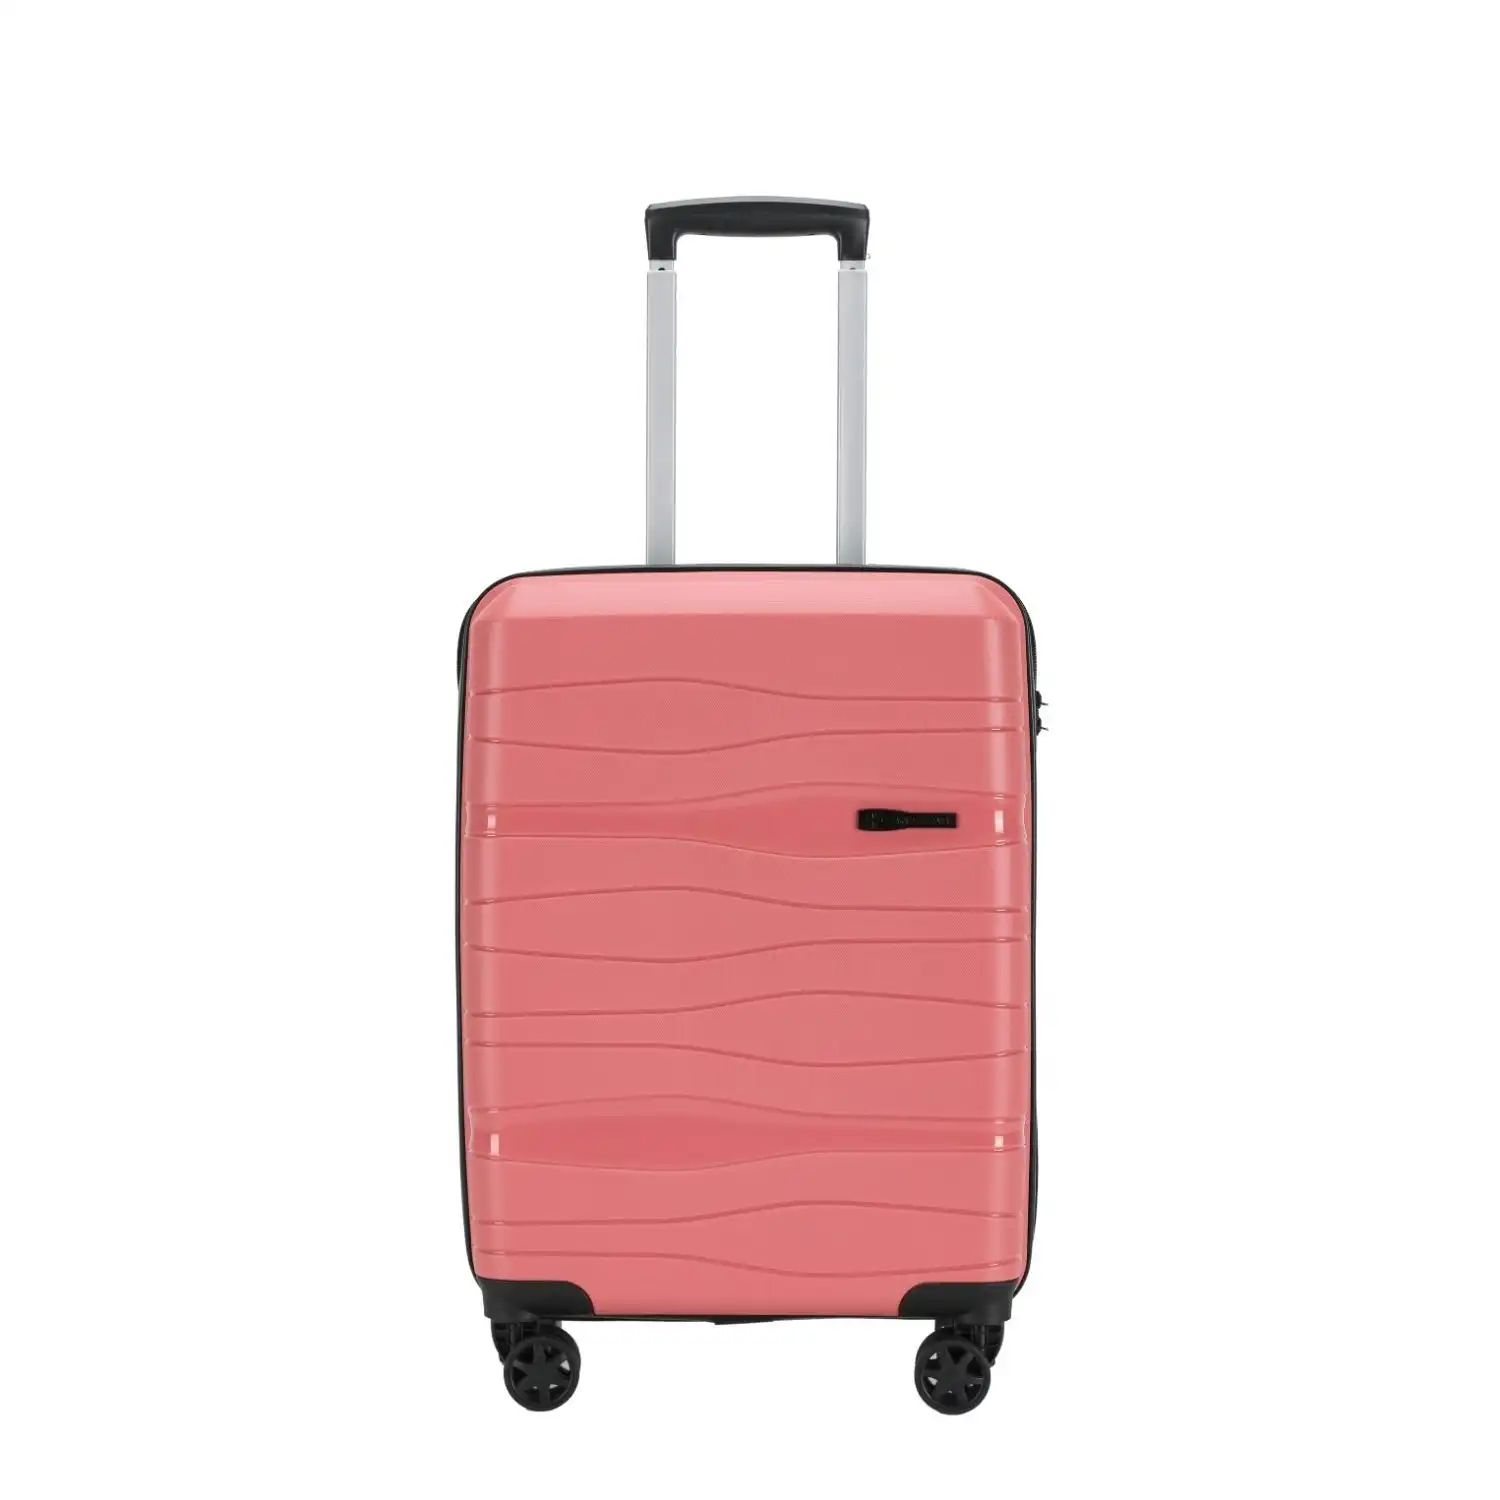 Swiss Equipe Brighton Luggage Small Wheeled Trolley Hard Suitcase Pink 42L